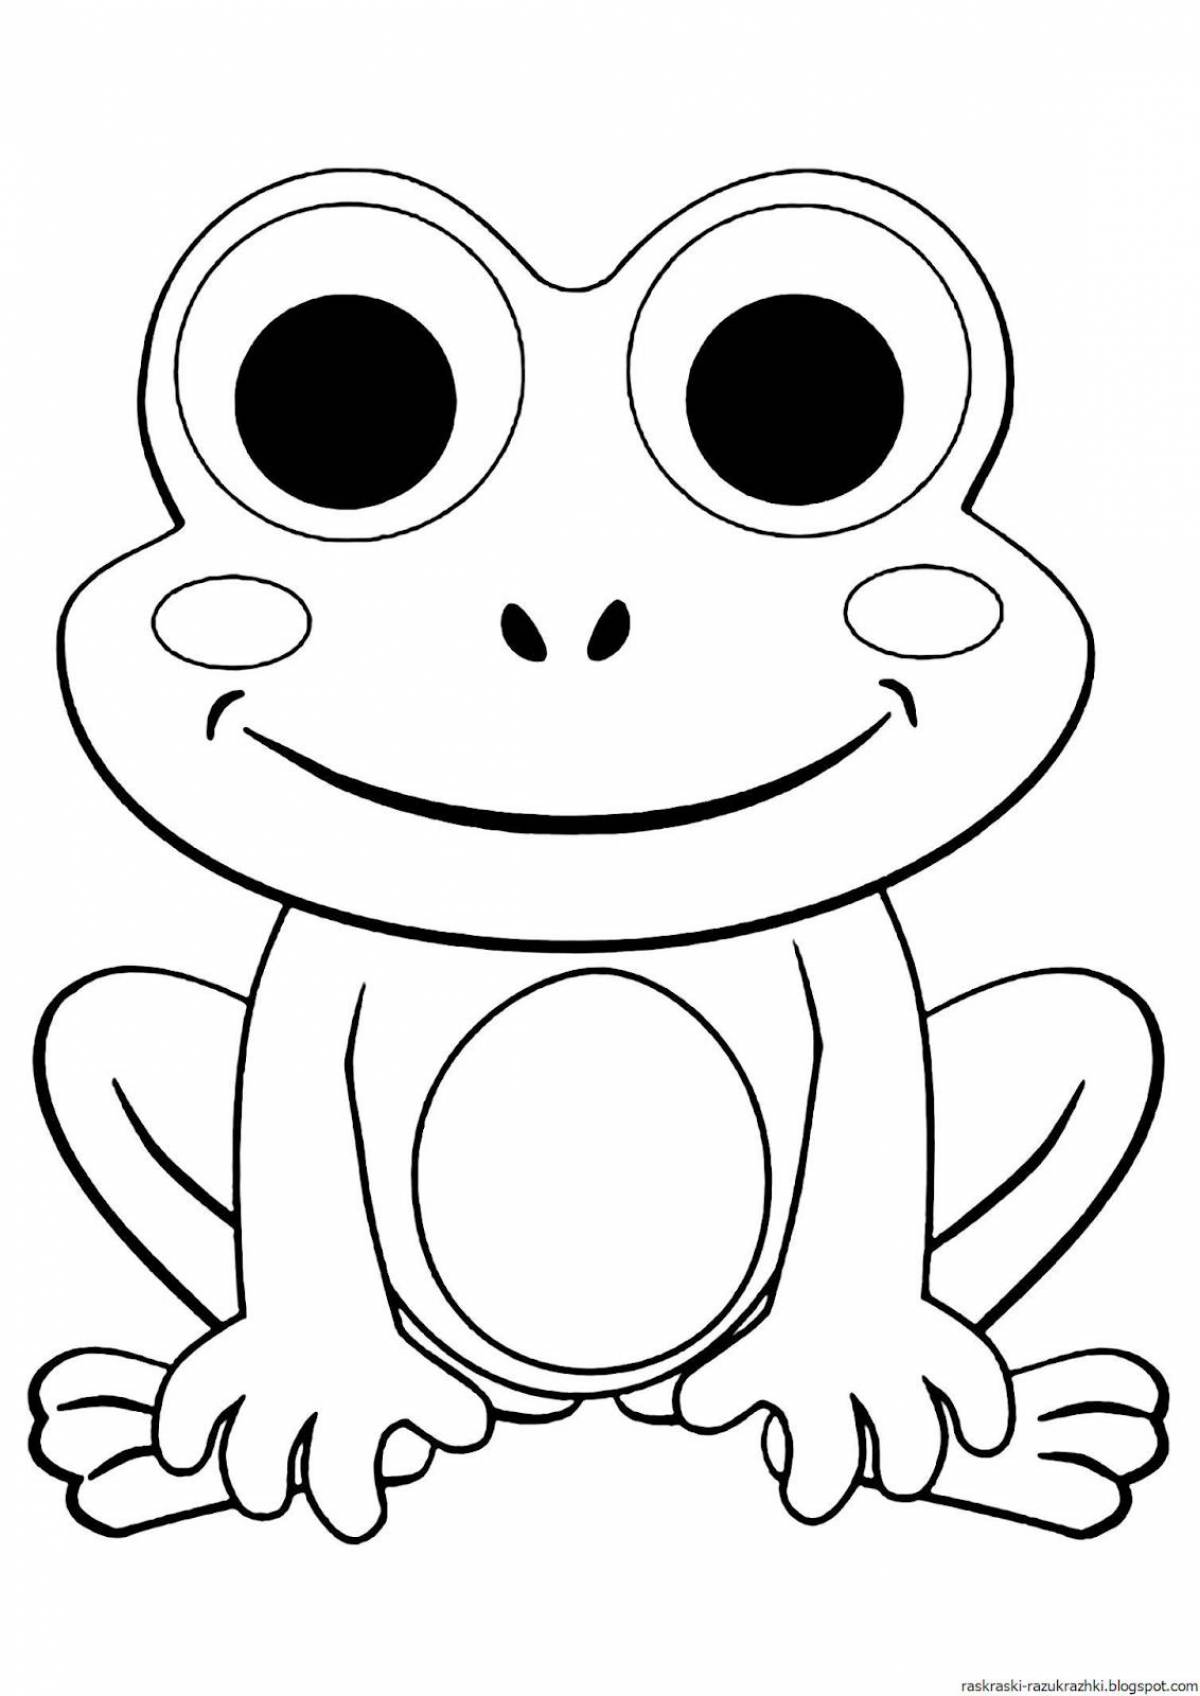 Colorful frog coloring page for kids